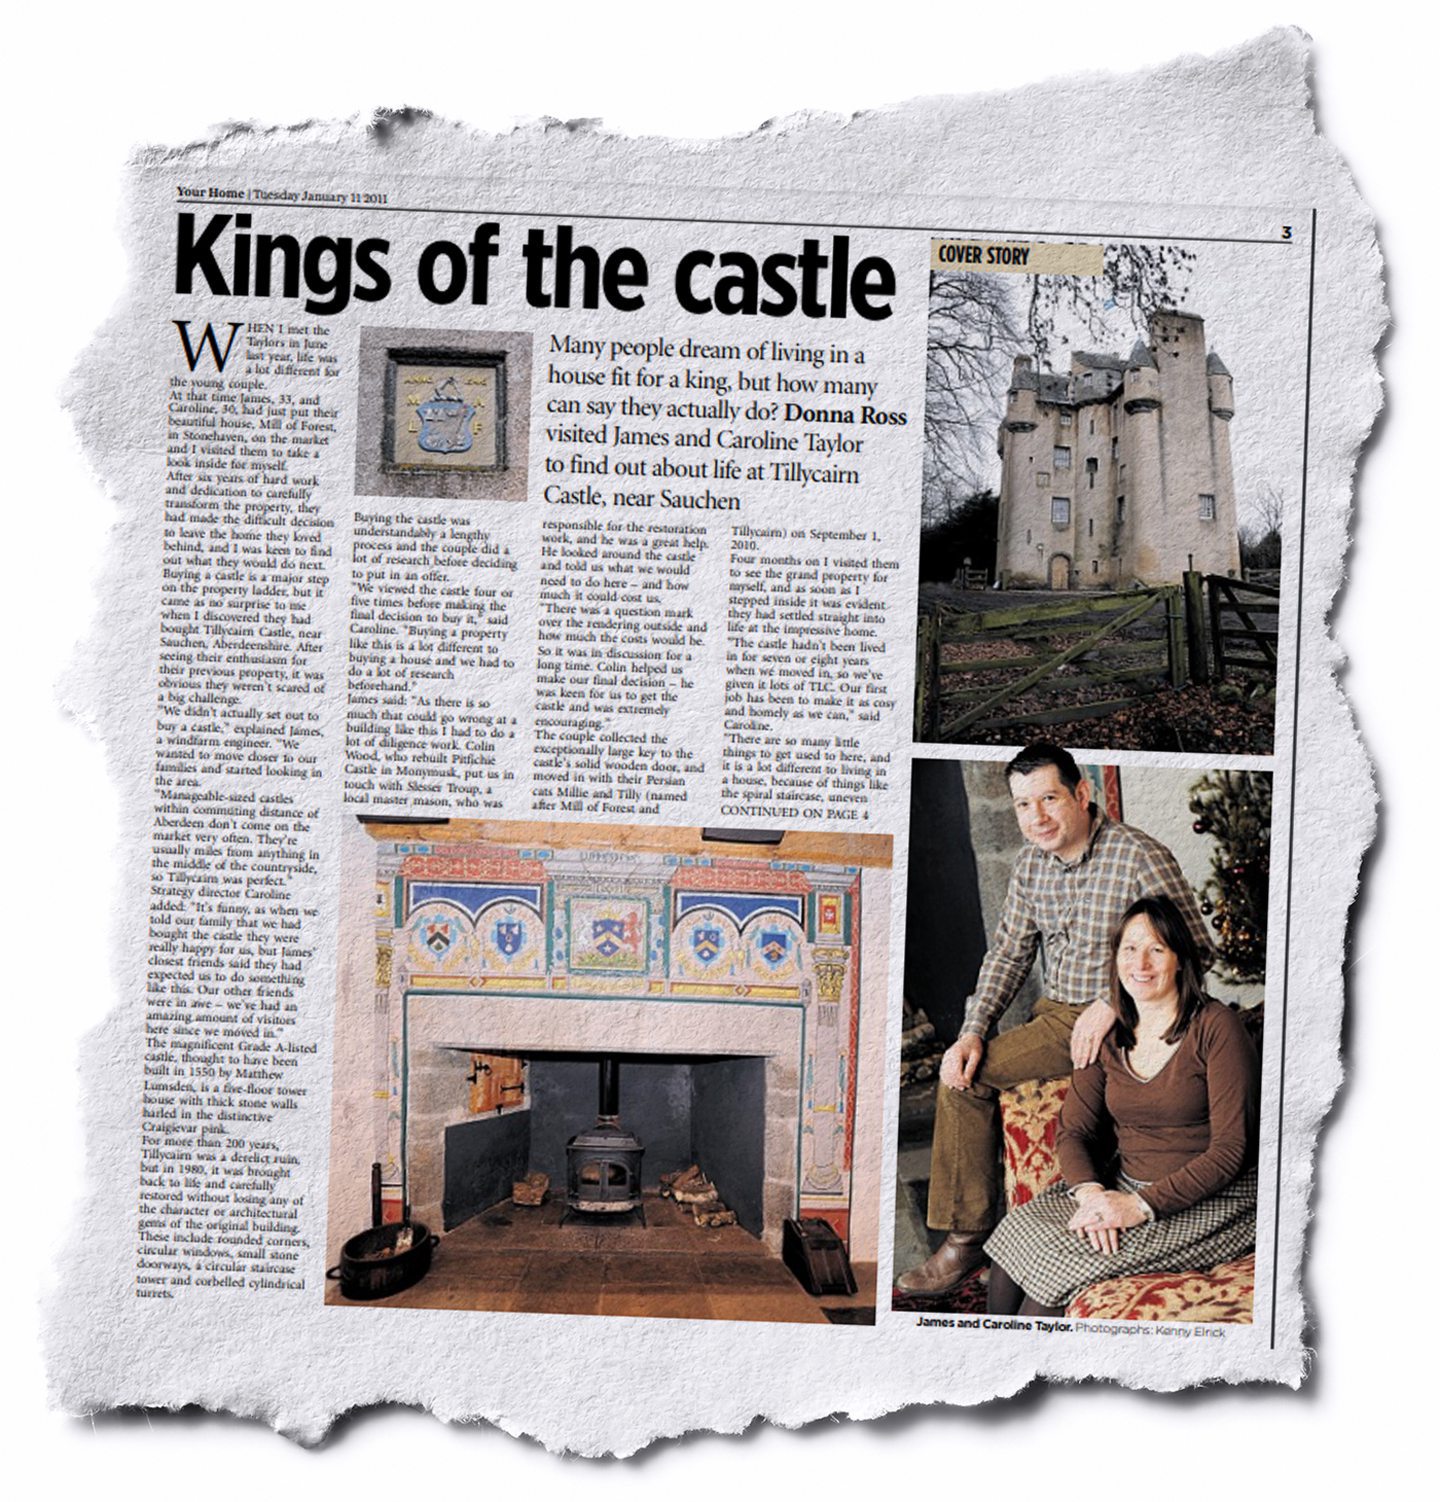 An article with the headline "Kings off the castle"